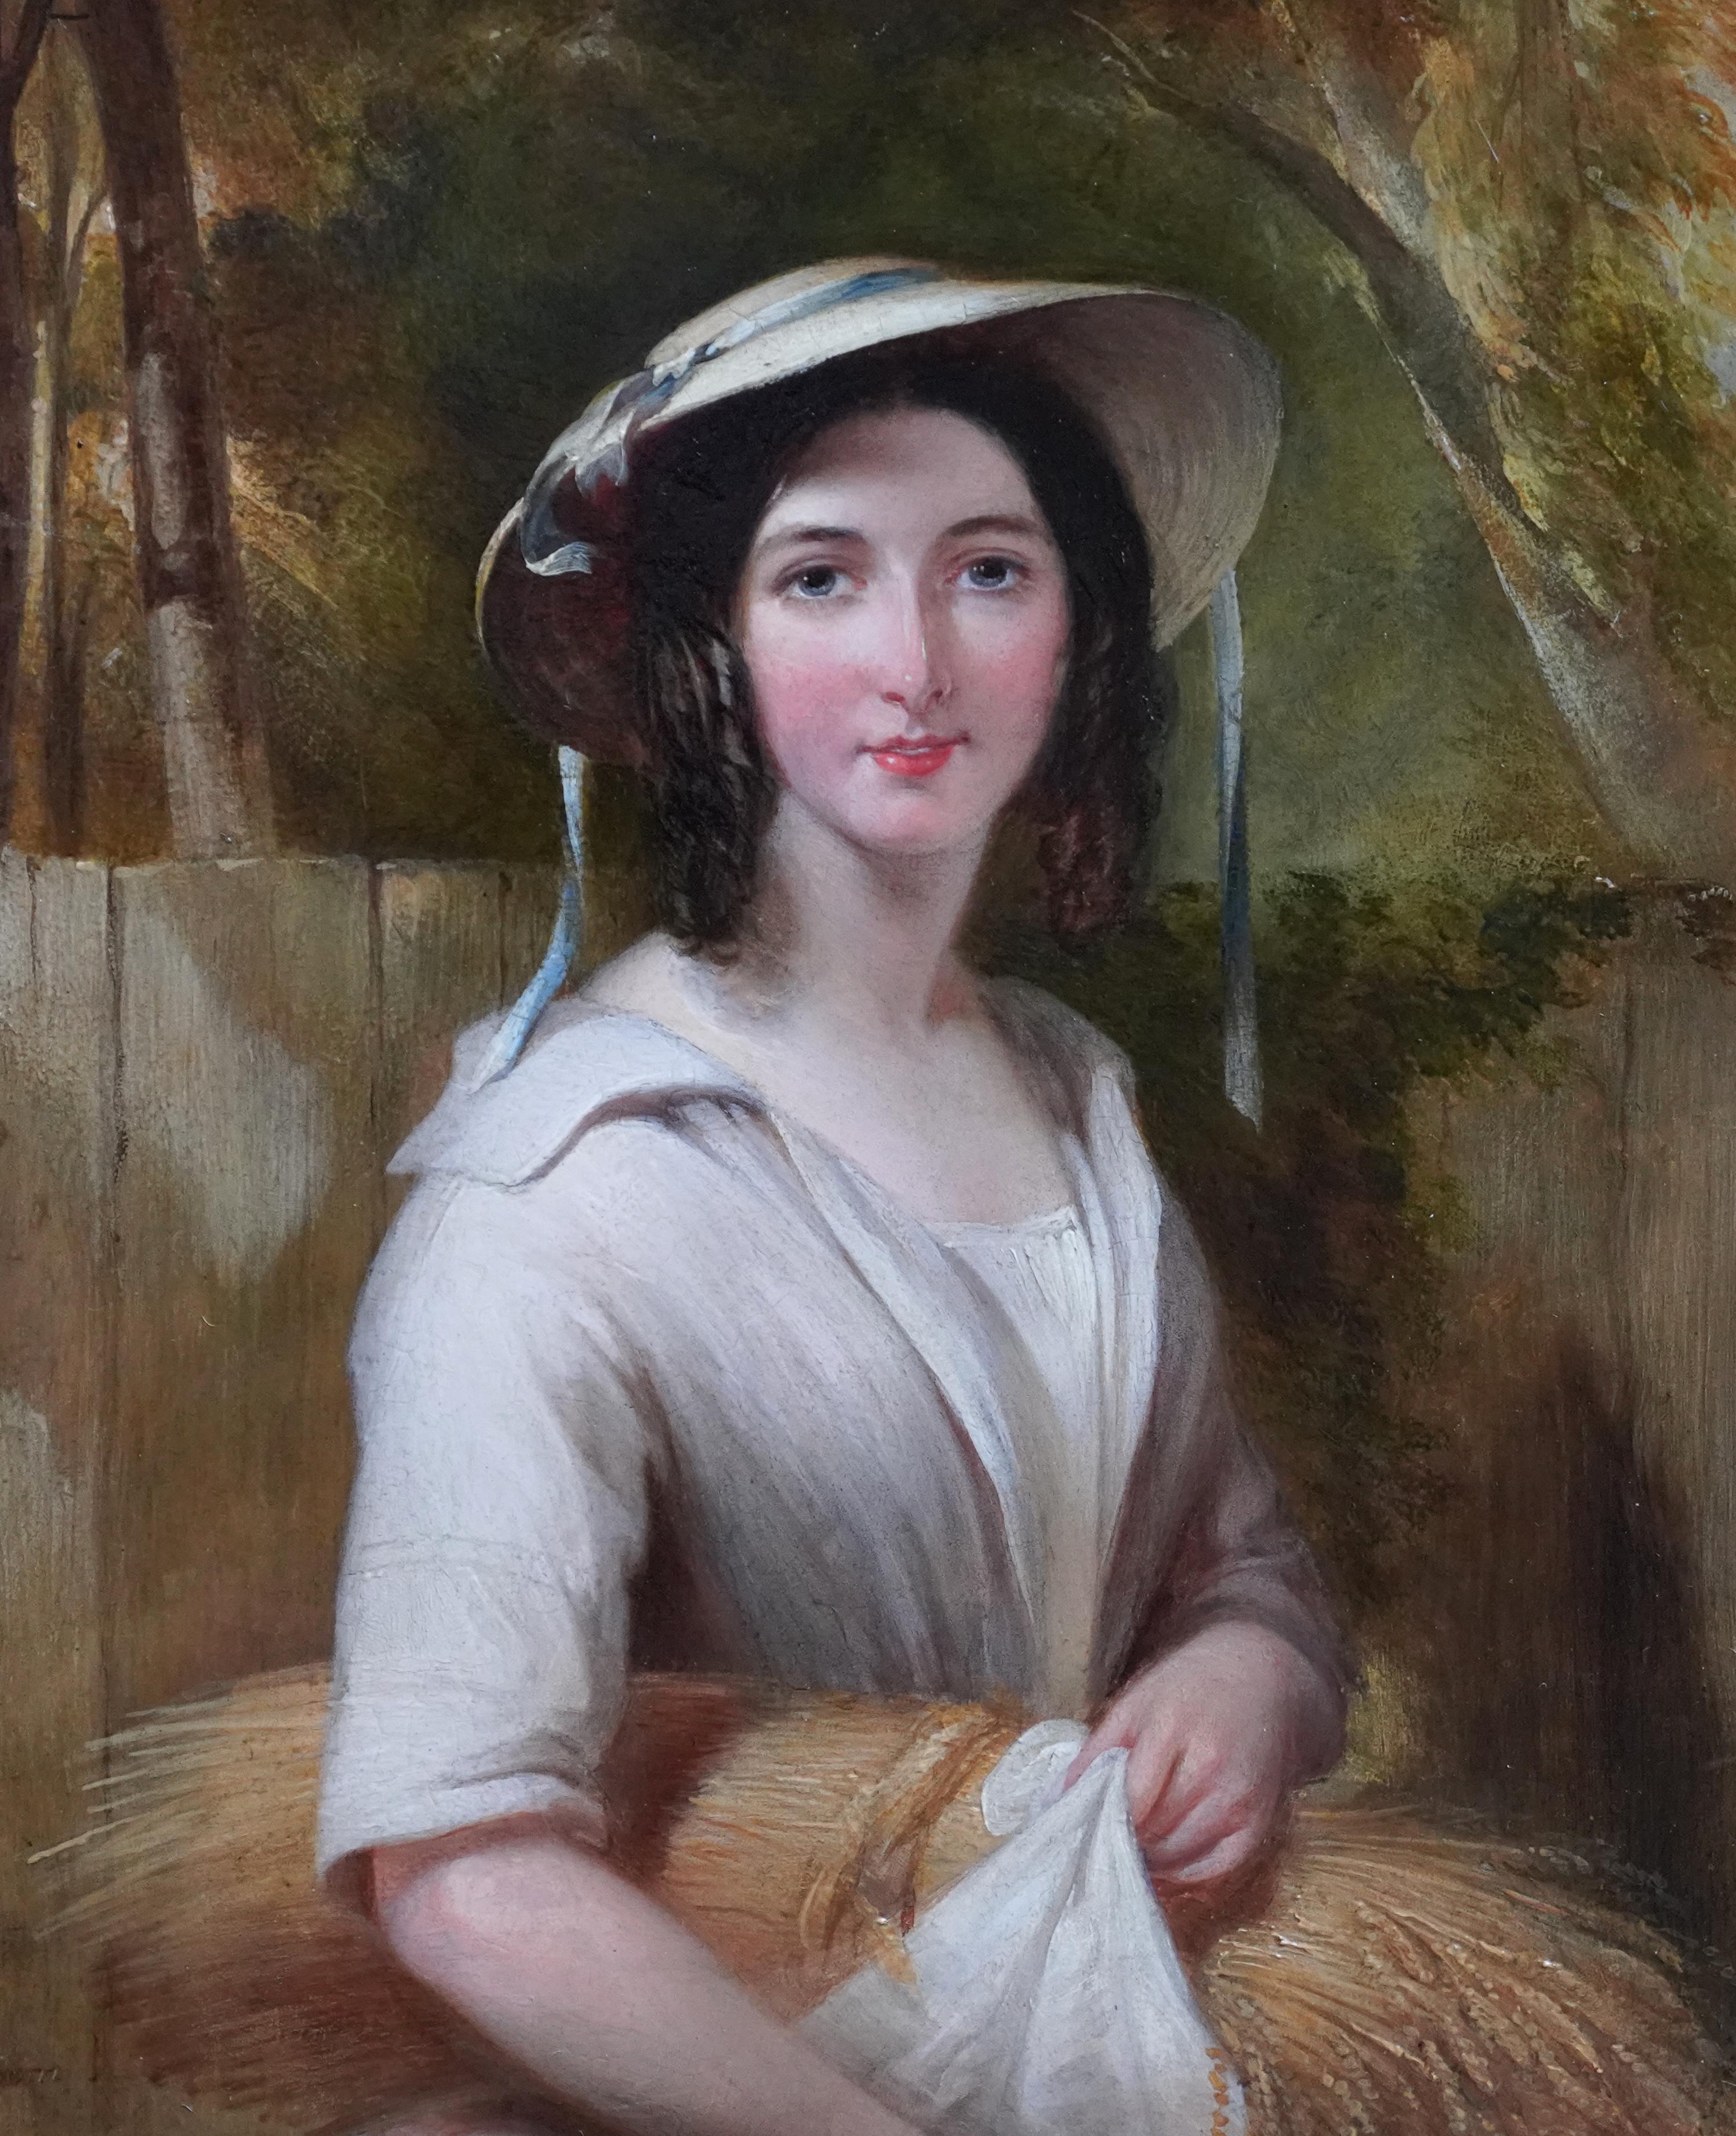 Henry Room, noted Birmingham artist, painted this lovely Victorian portrait oil painting. It was painted in 1842 and exhibited at the Society of British Artists the same year, entitled Forsaken Innocence. It is a charming half length portrait of a